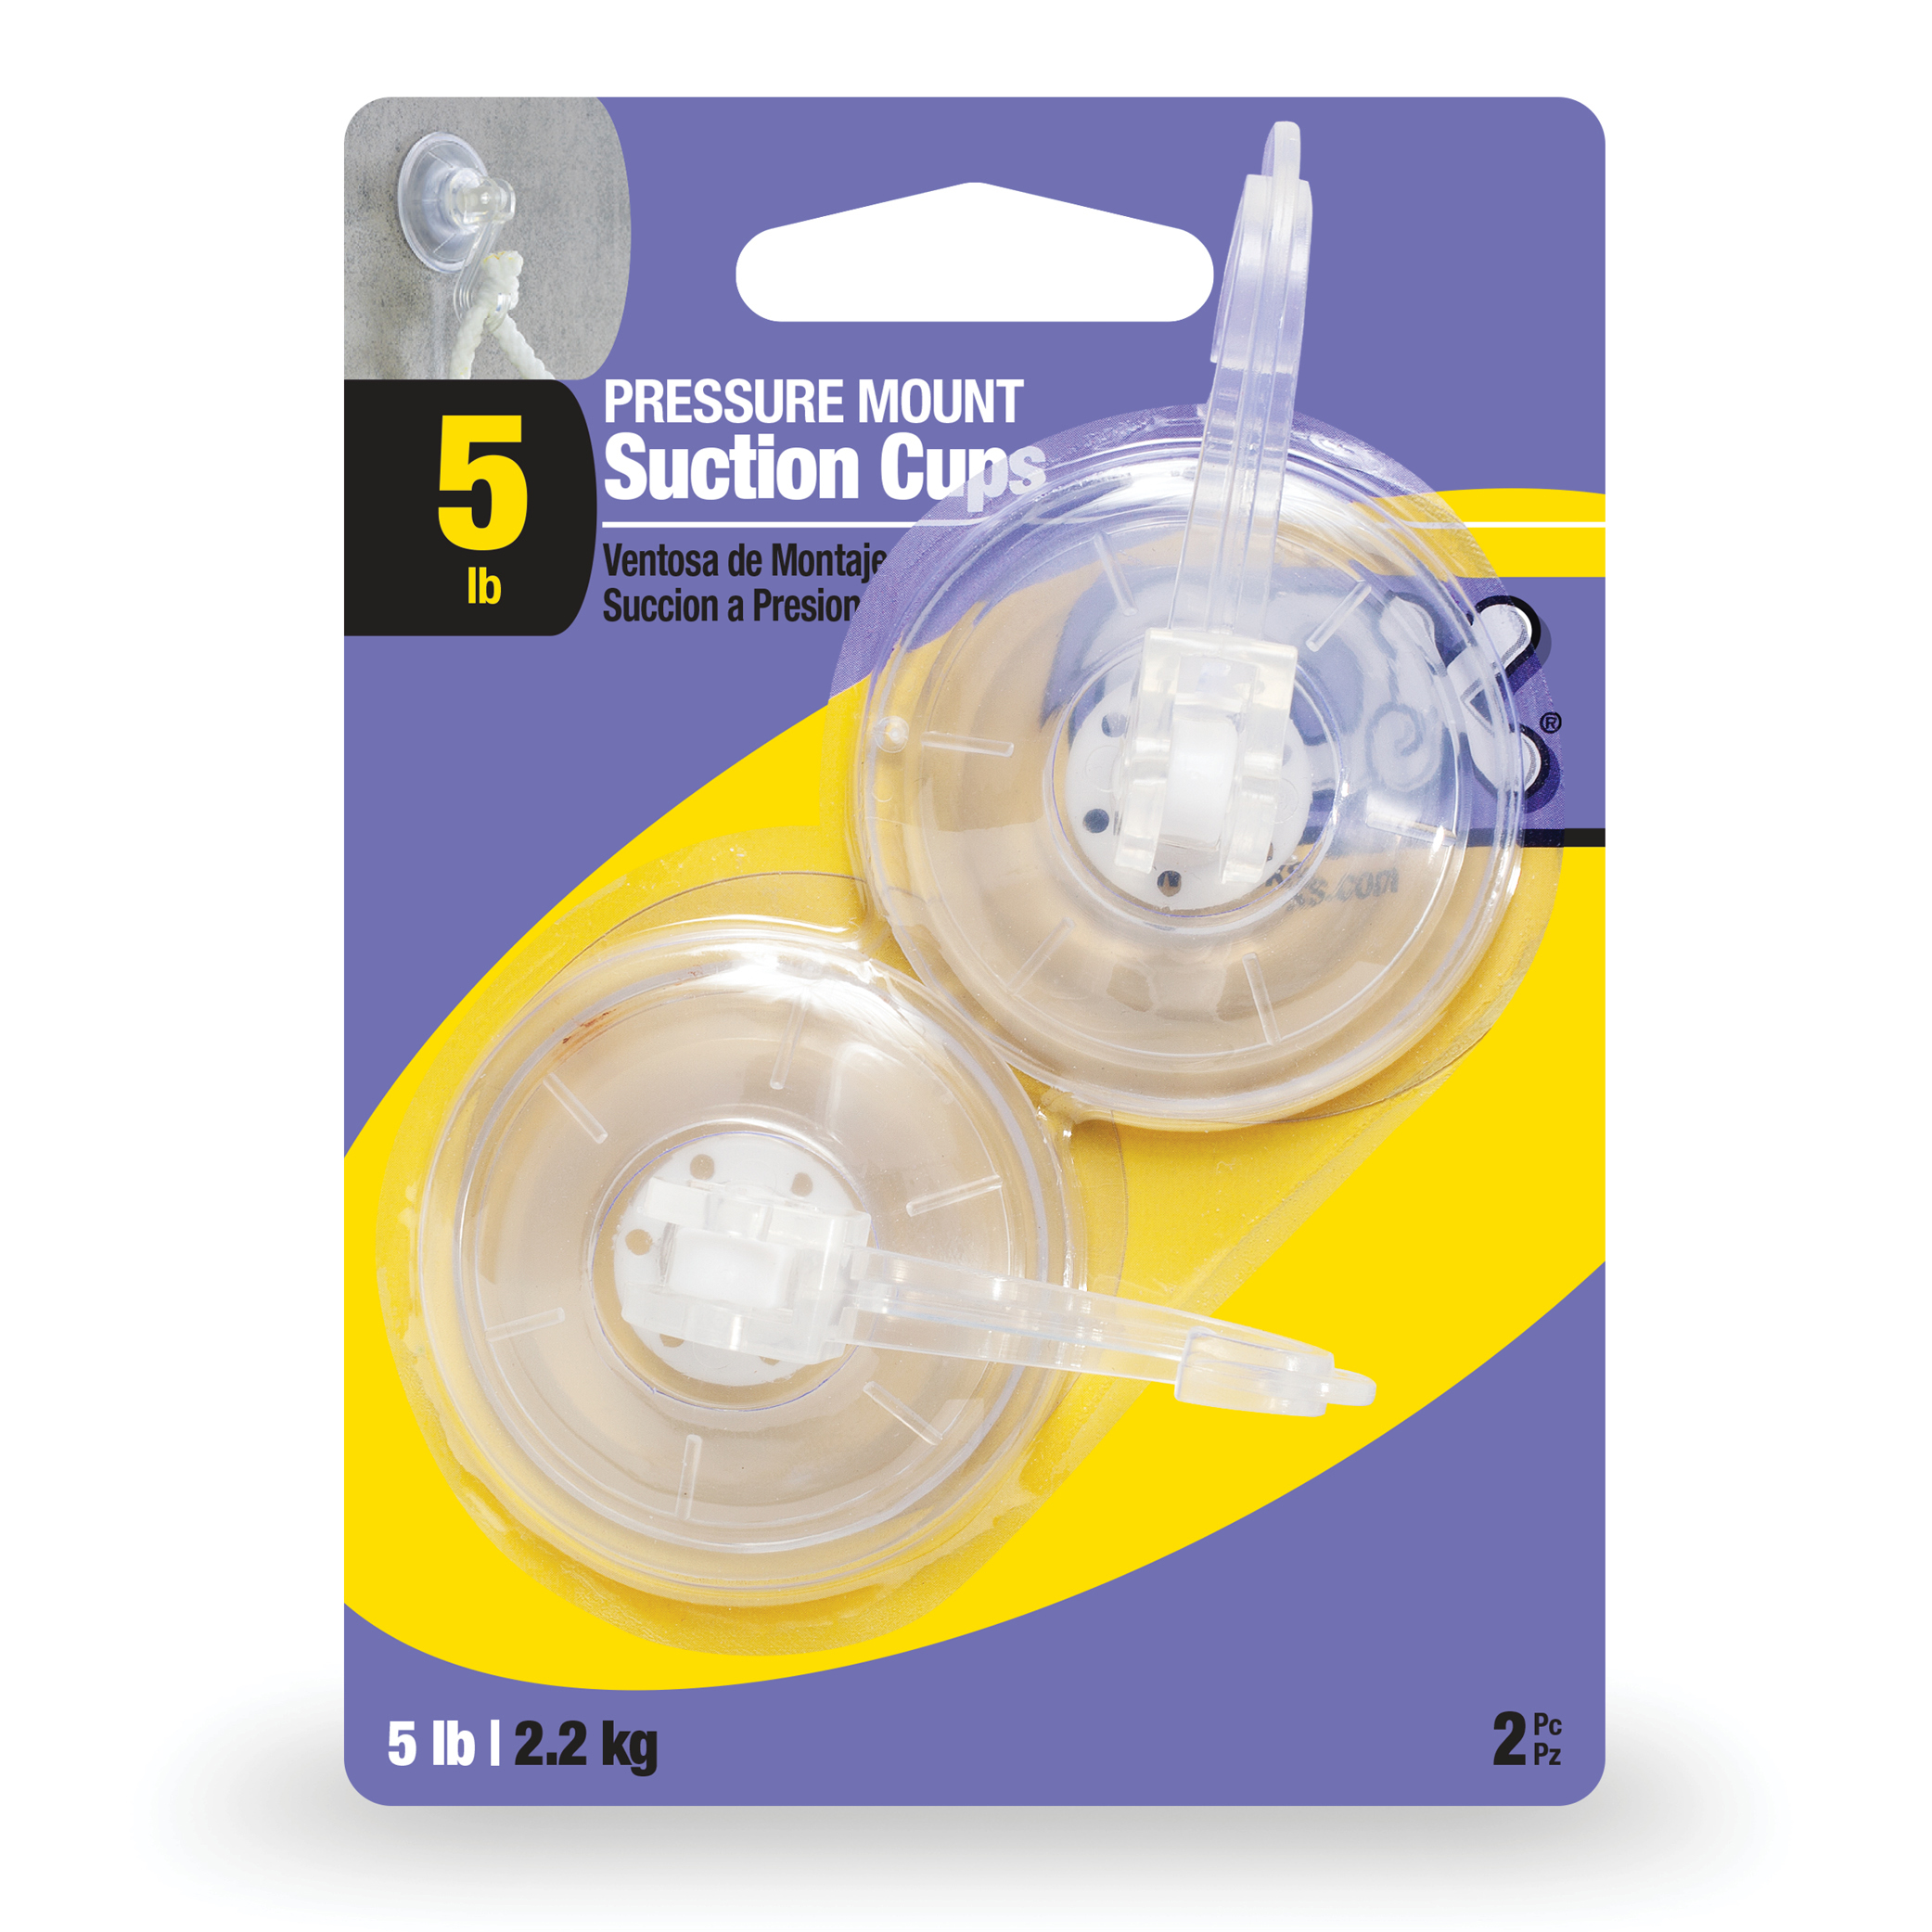 OOK Pressure Mount Suction Cups, Clear, 5lbs, Plastic, Pack of 2 - image 1 of 6